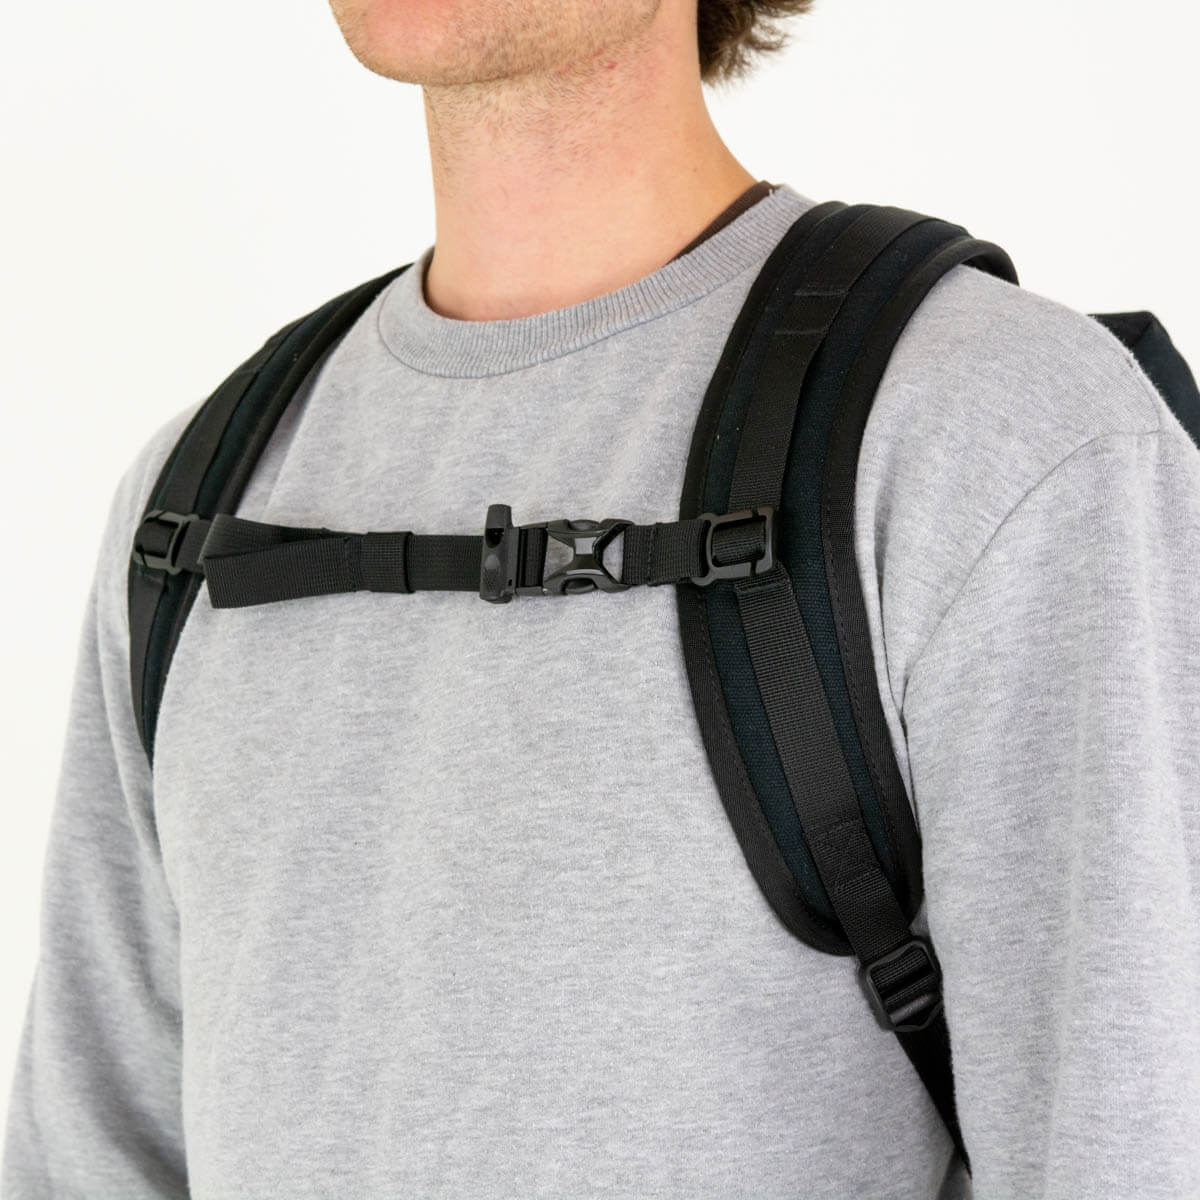 Replacement Daypack Sternum Strap